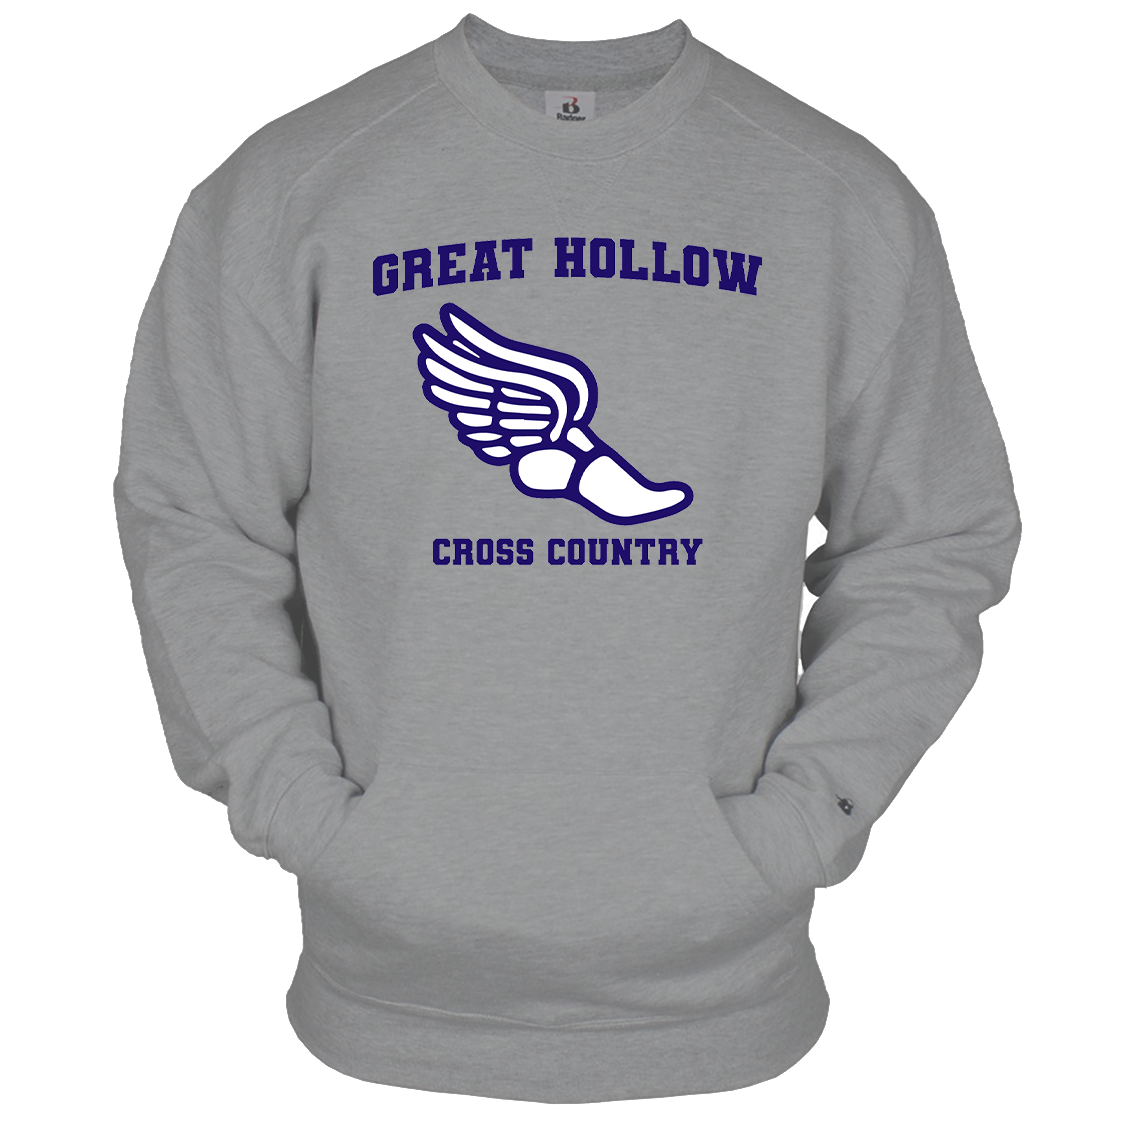 Great Hollow Cross Country Lacrosse Club Pocket Crew